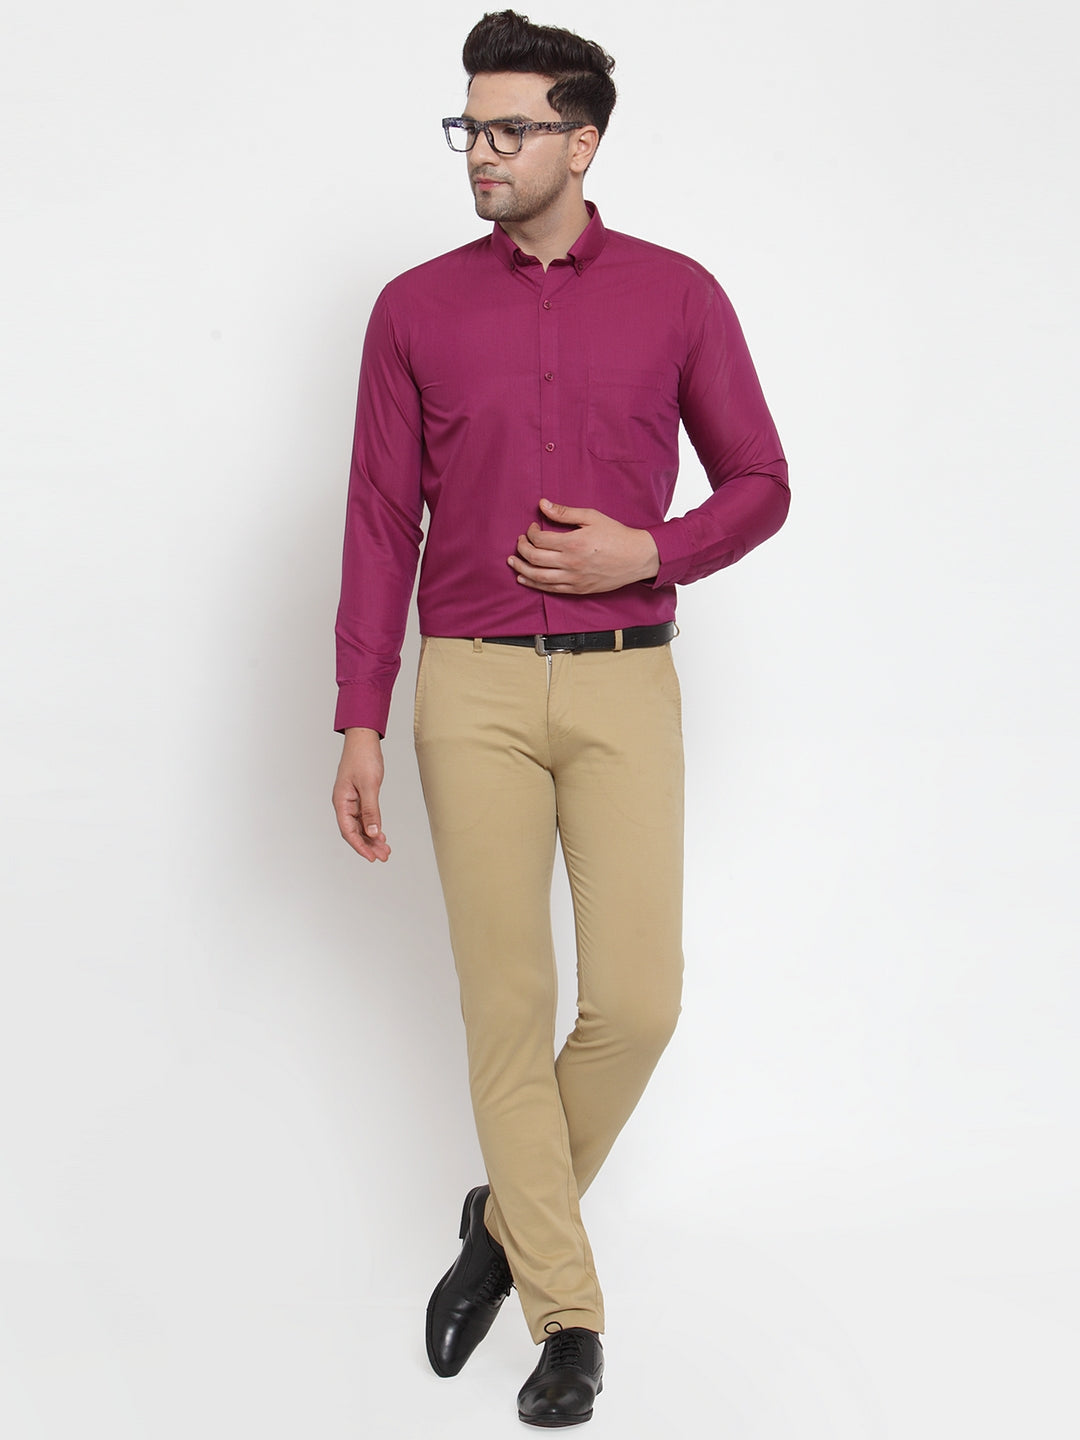 Men's Red Cotton Solid Button Down Formal Shirts ( SF 713Magenta ) - Jainish